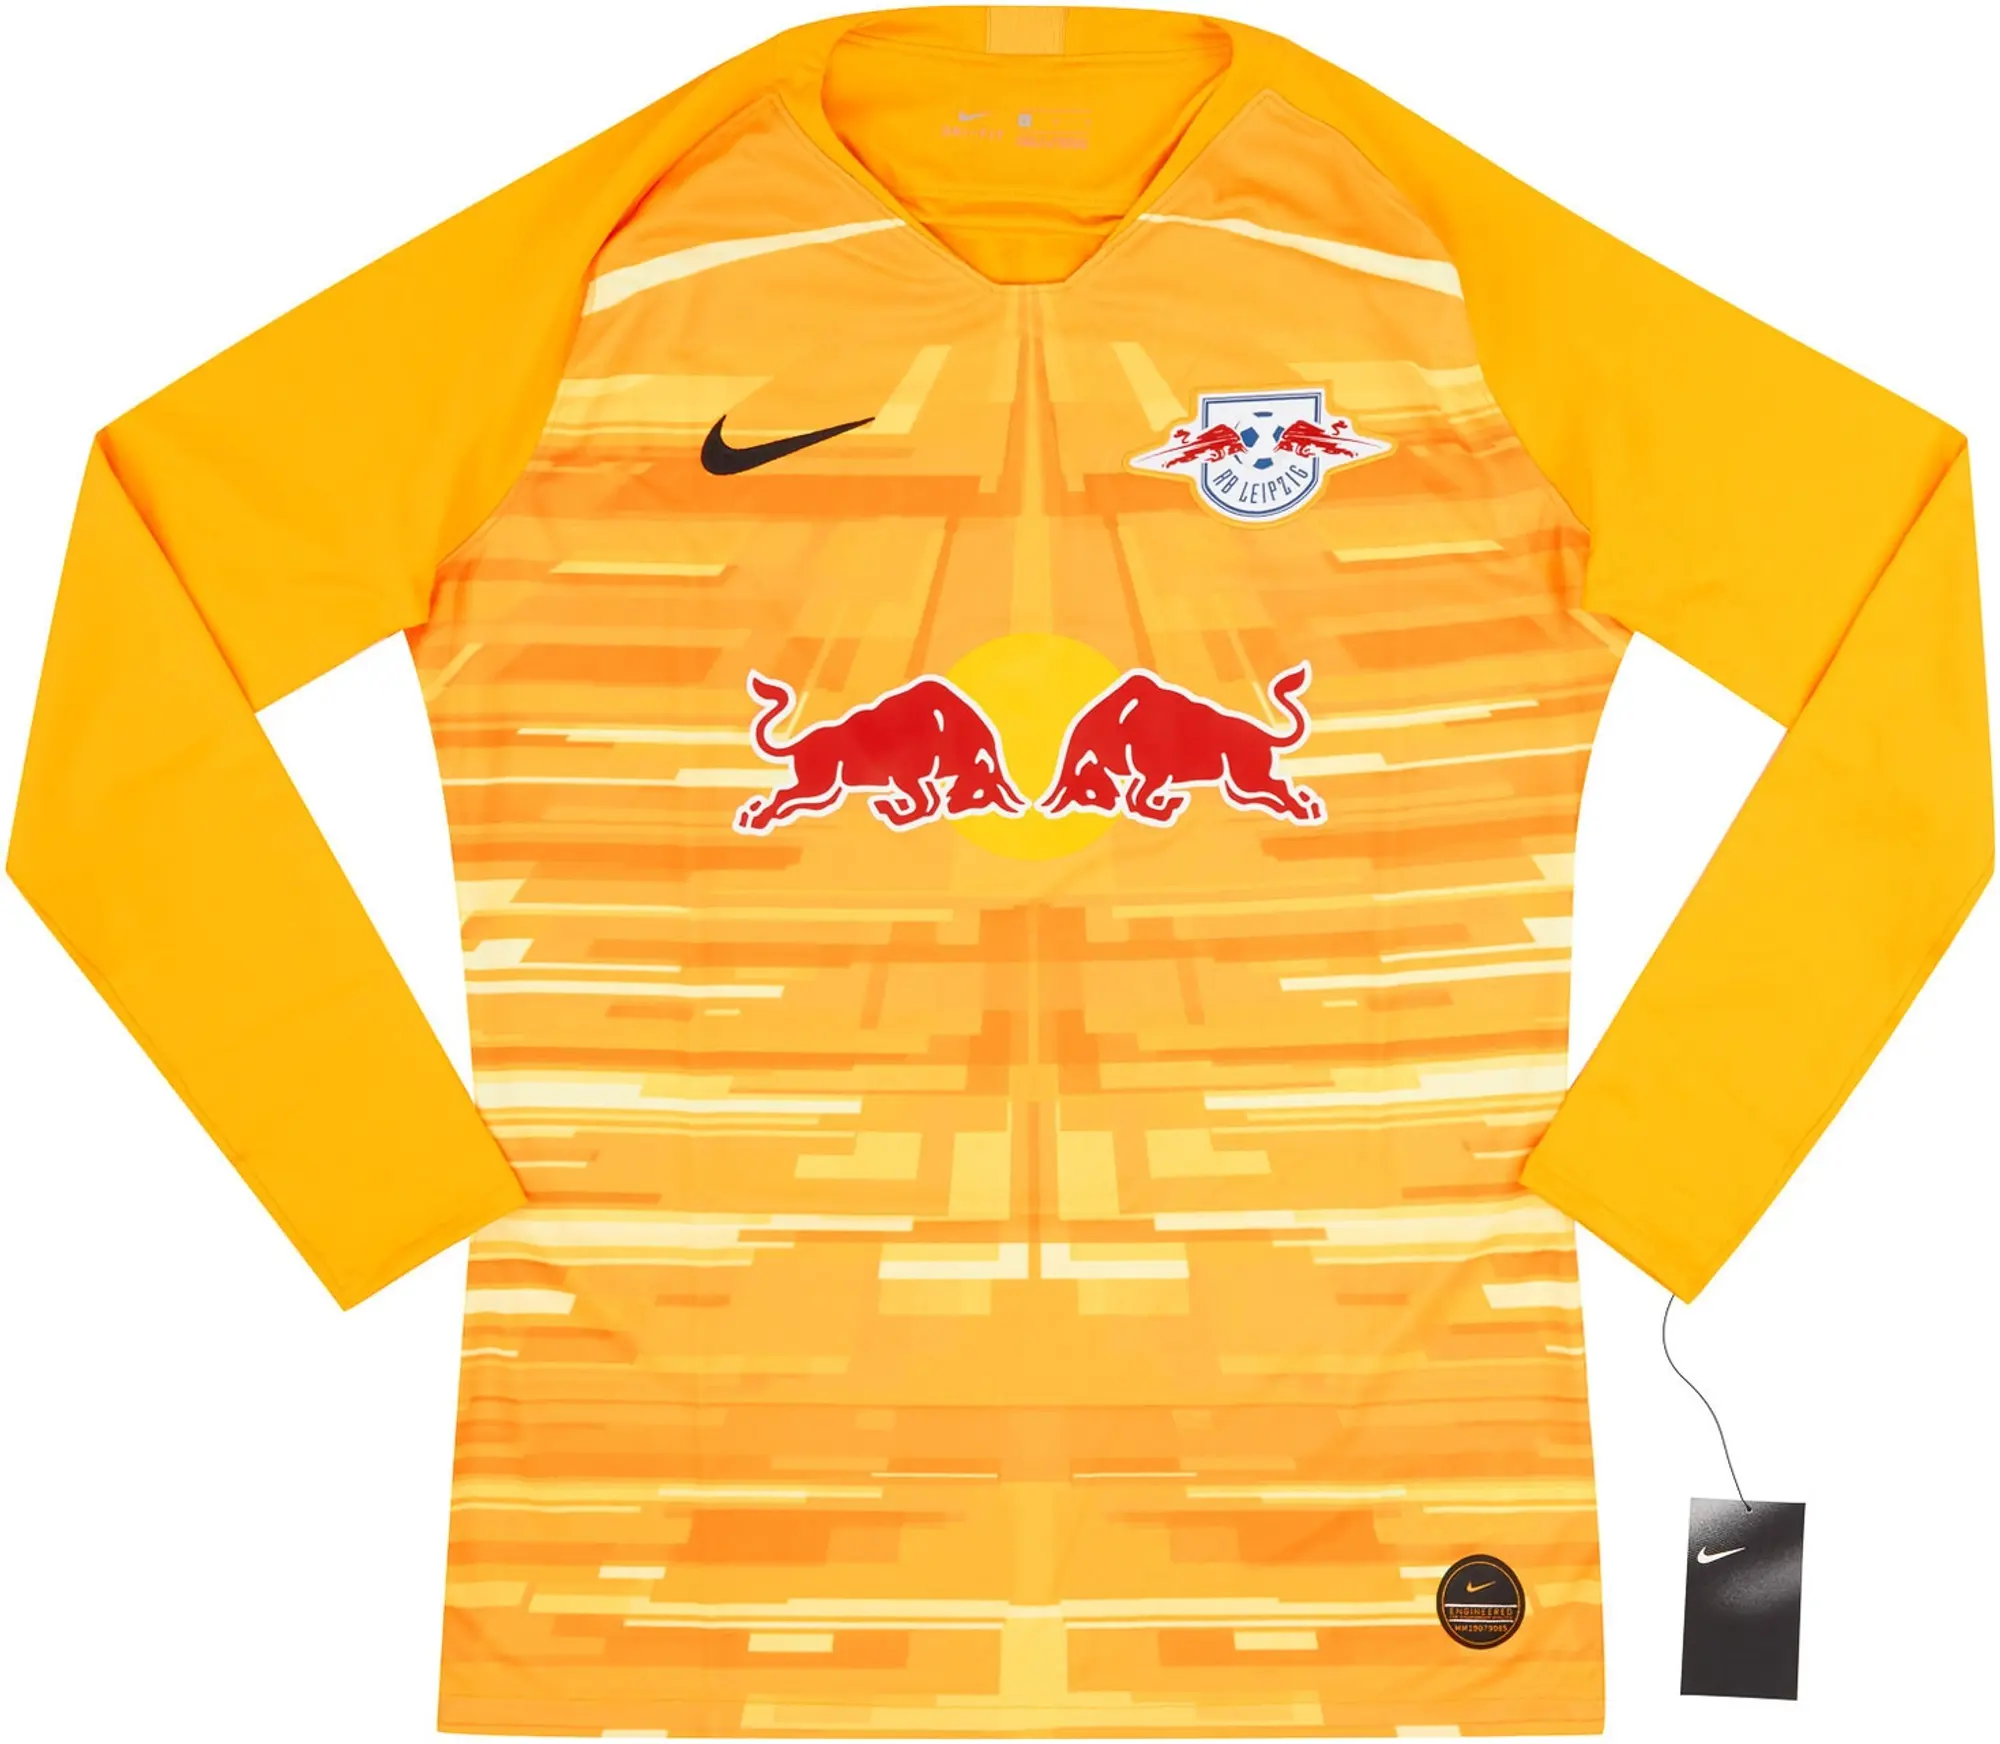 Champion RB Leipzig Mens LS Goalkeeper Player Issue Home Shirt 2019/20